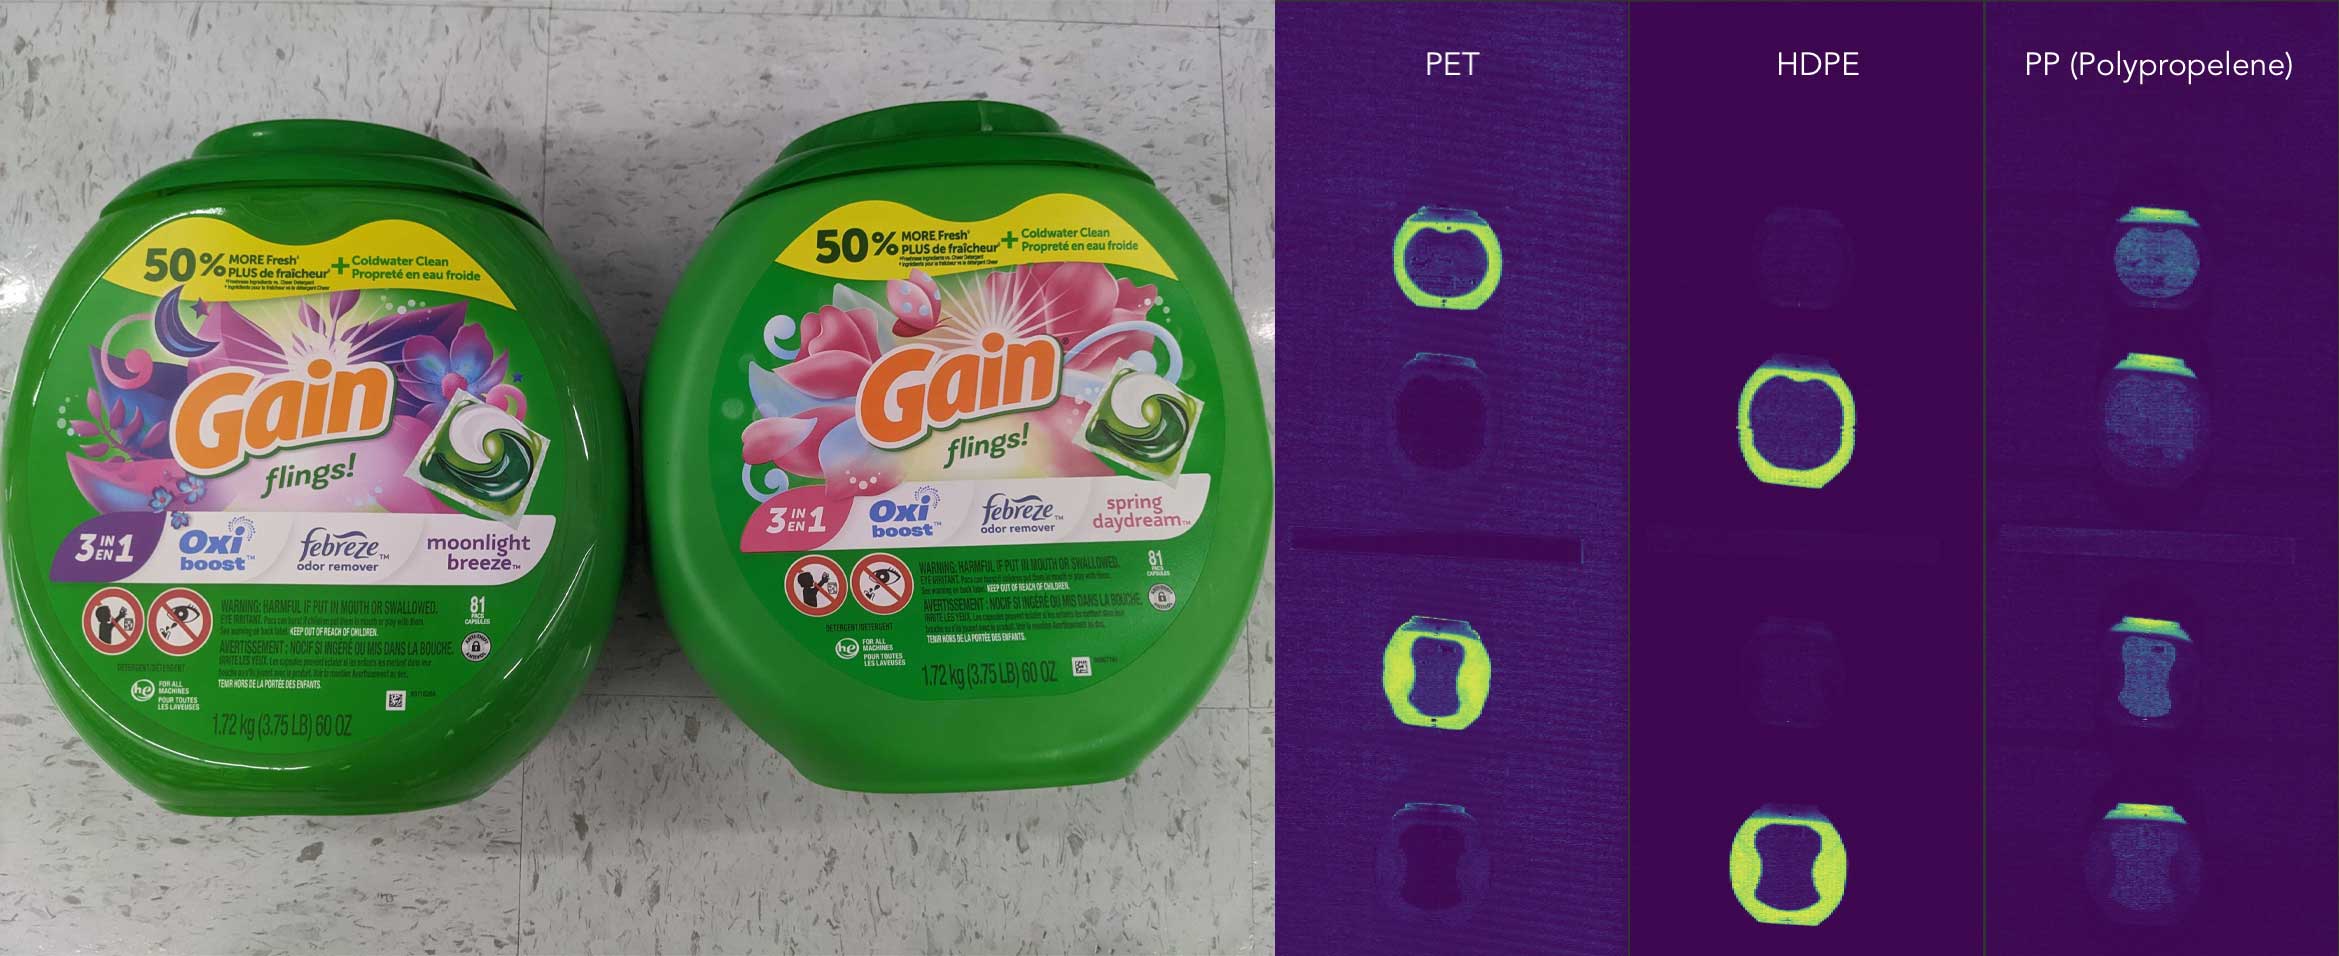 Hyperspectral image reveals differences in two detergent bottles